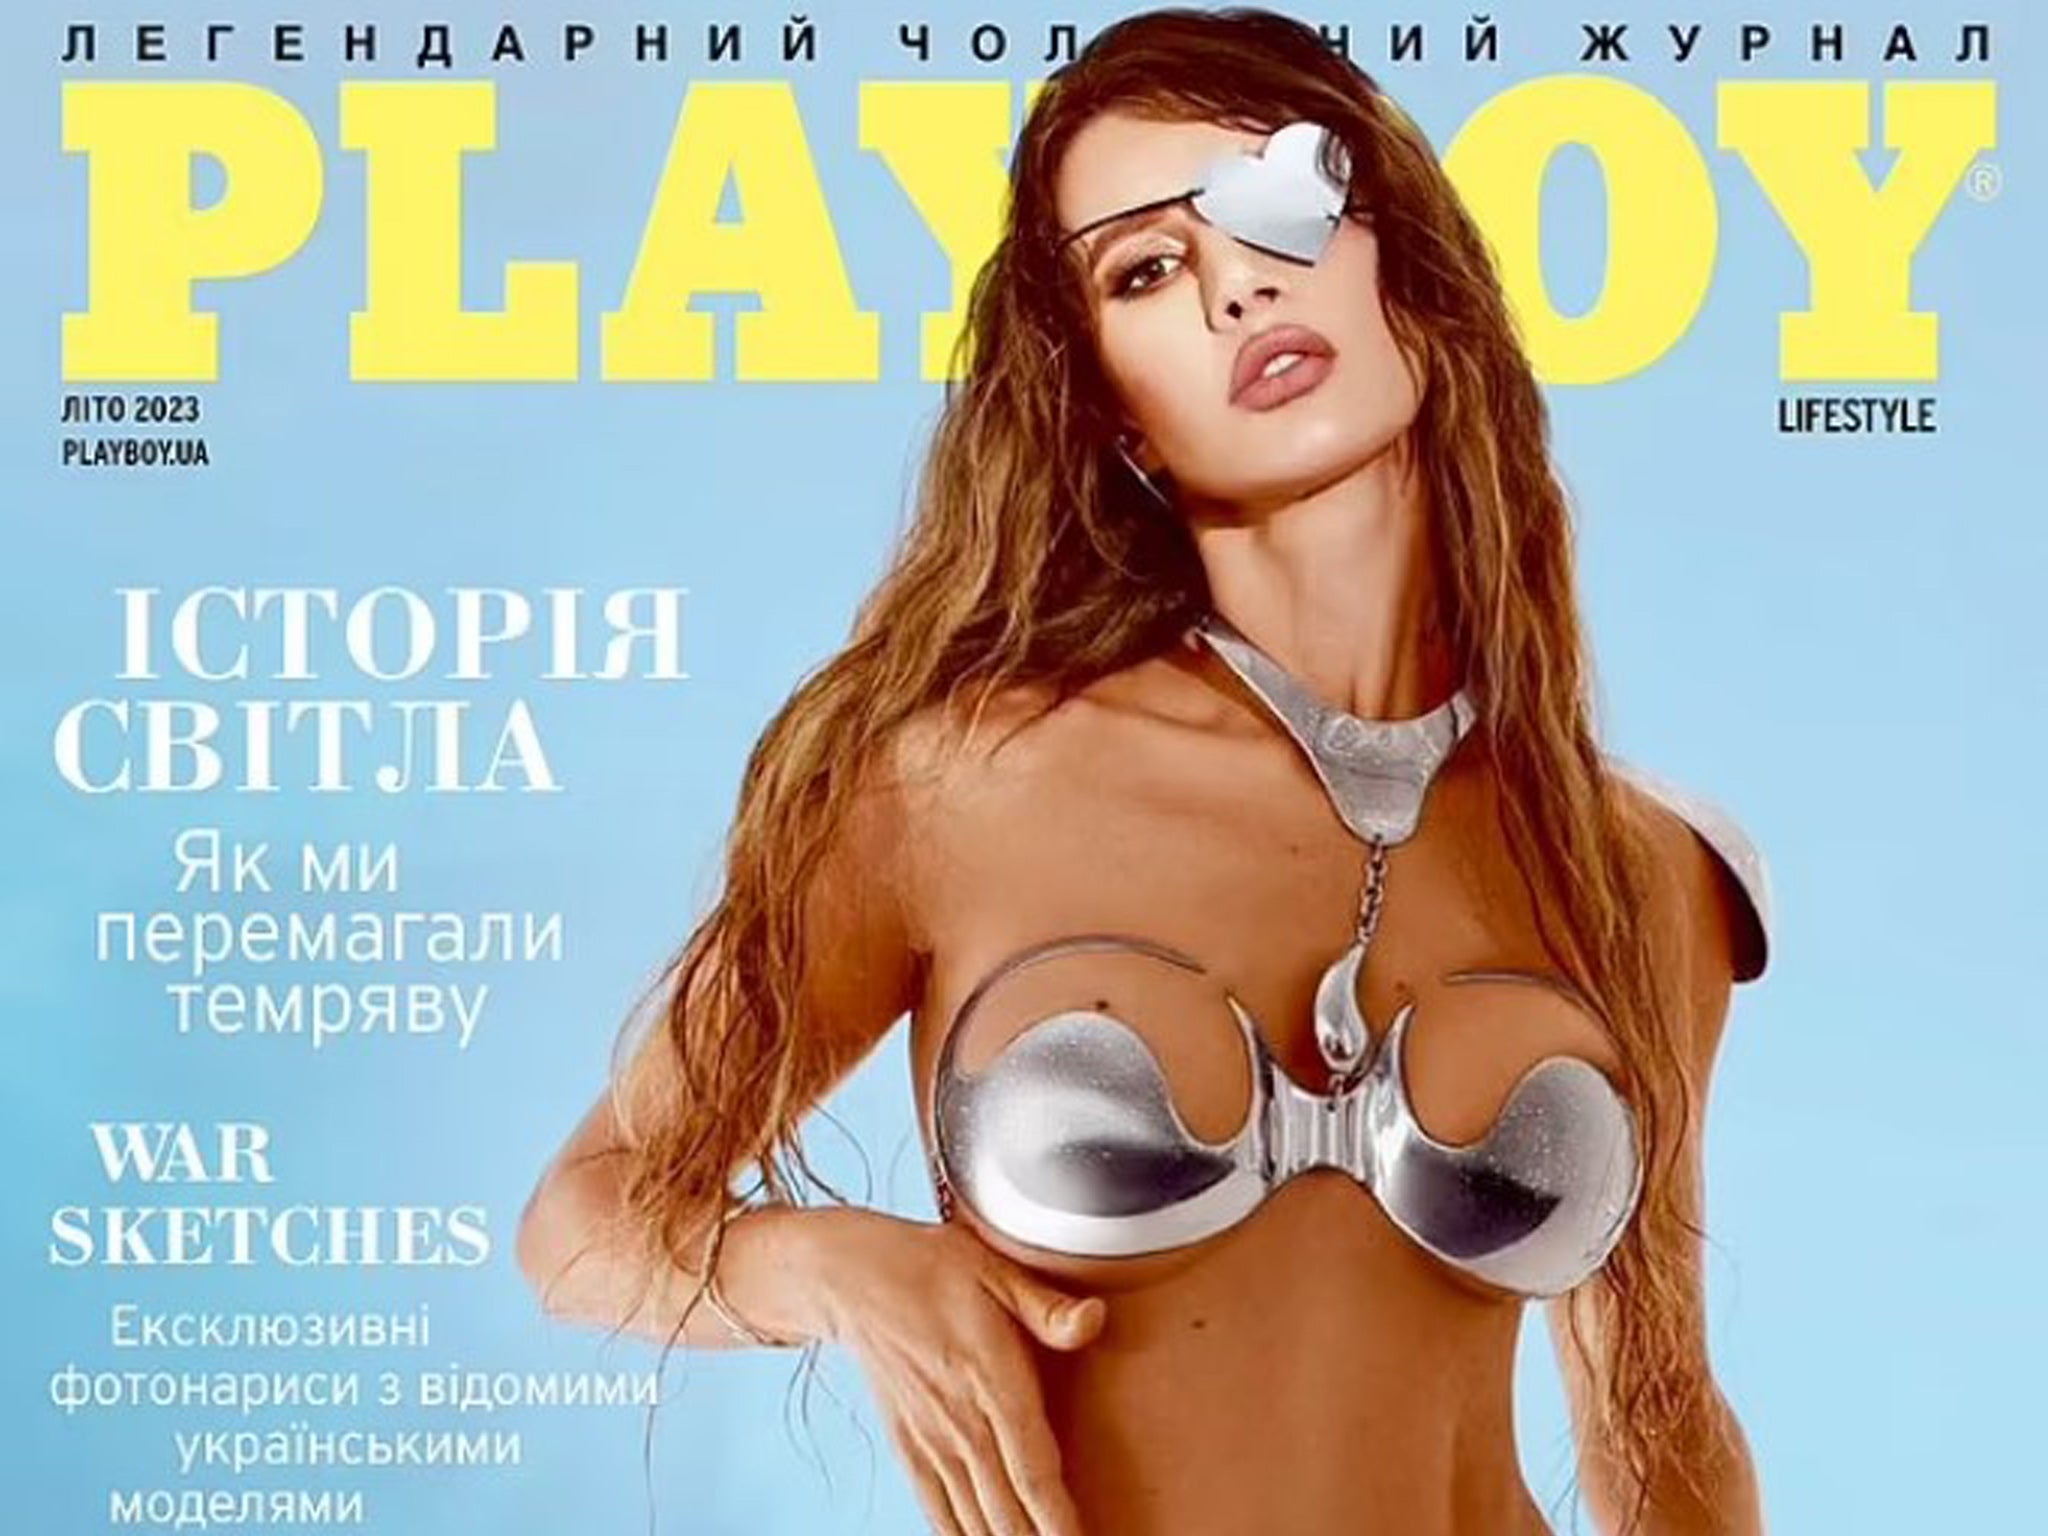 Iryna Bilotserkovets Ukrainian mother who lost an eye in attempted assassination is Playboy cover star The Independent pic